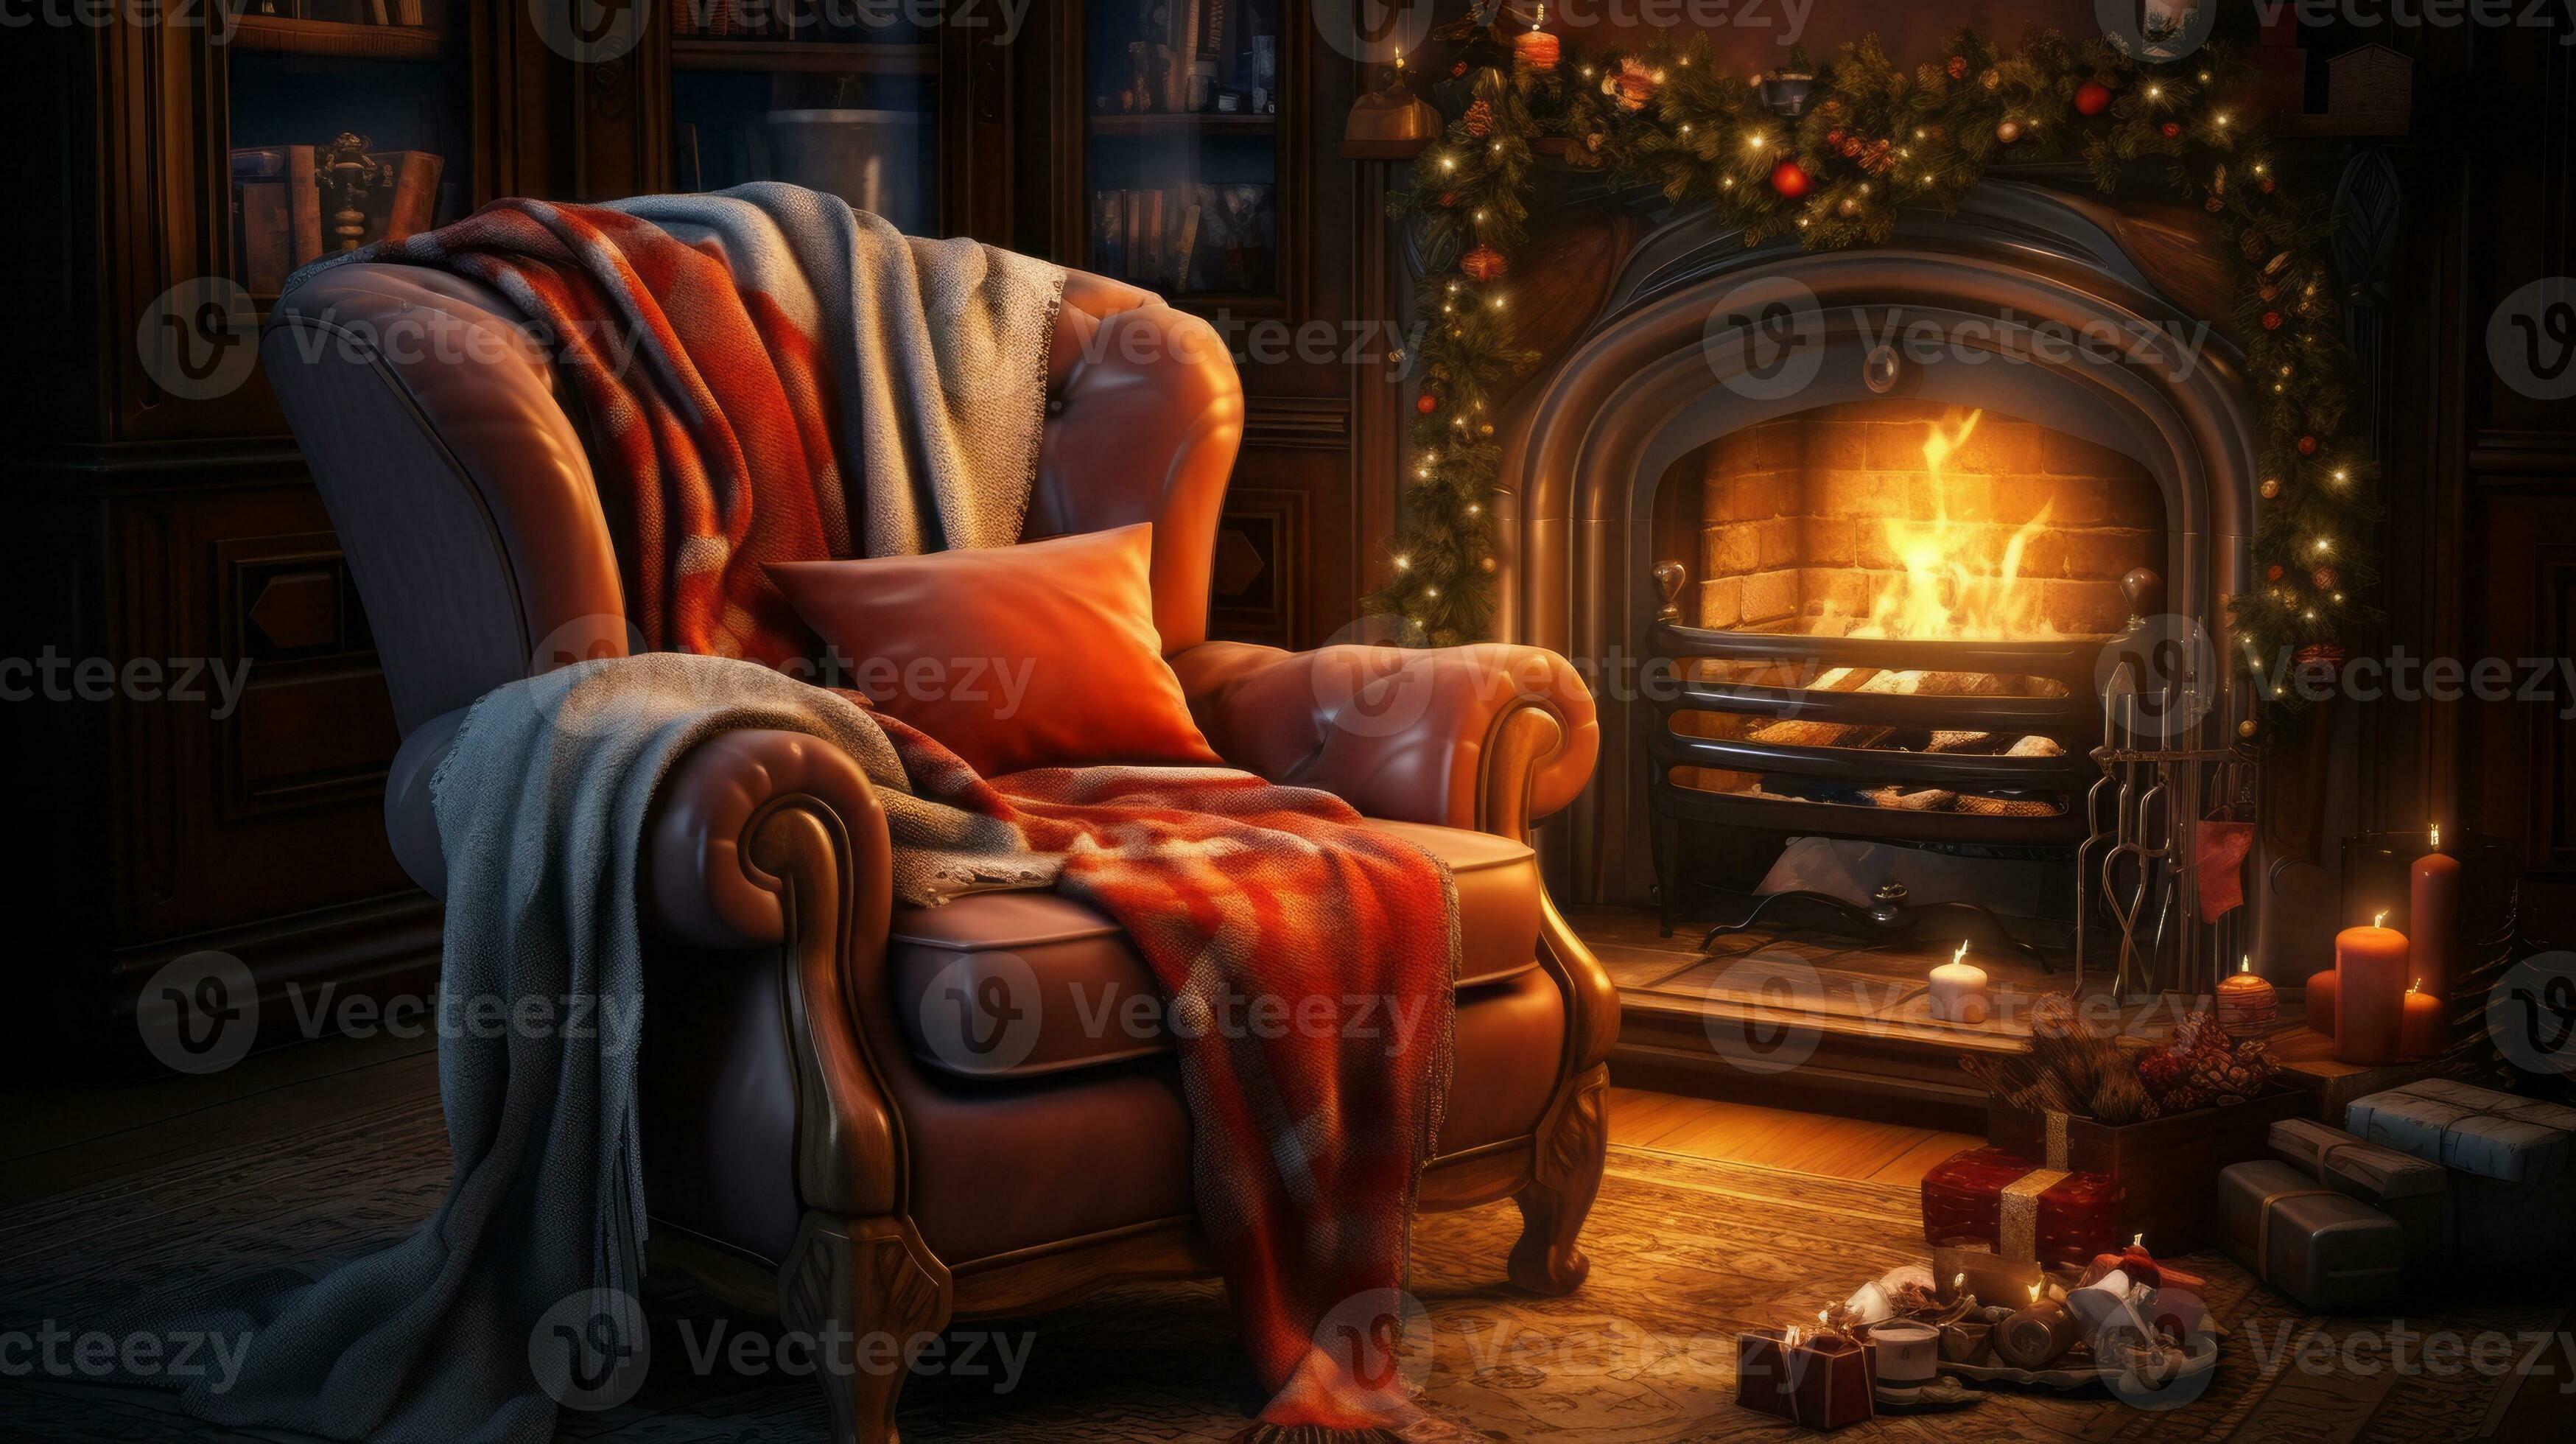 Cozy armchair with pillow and blanket next to a burning fireplace. New  Year's interior with candels and gifts. Generated by artificial  intelligence 25901014 Stock Photo at Vecteezy